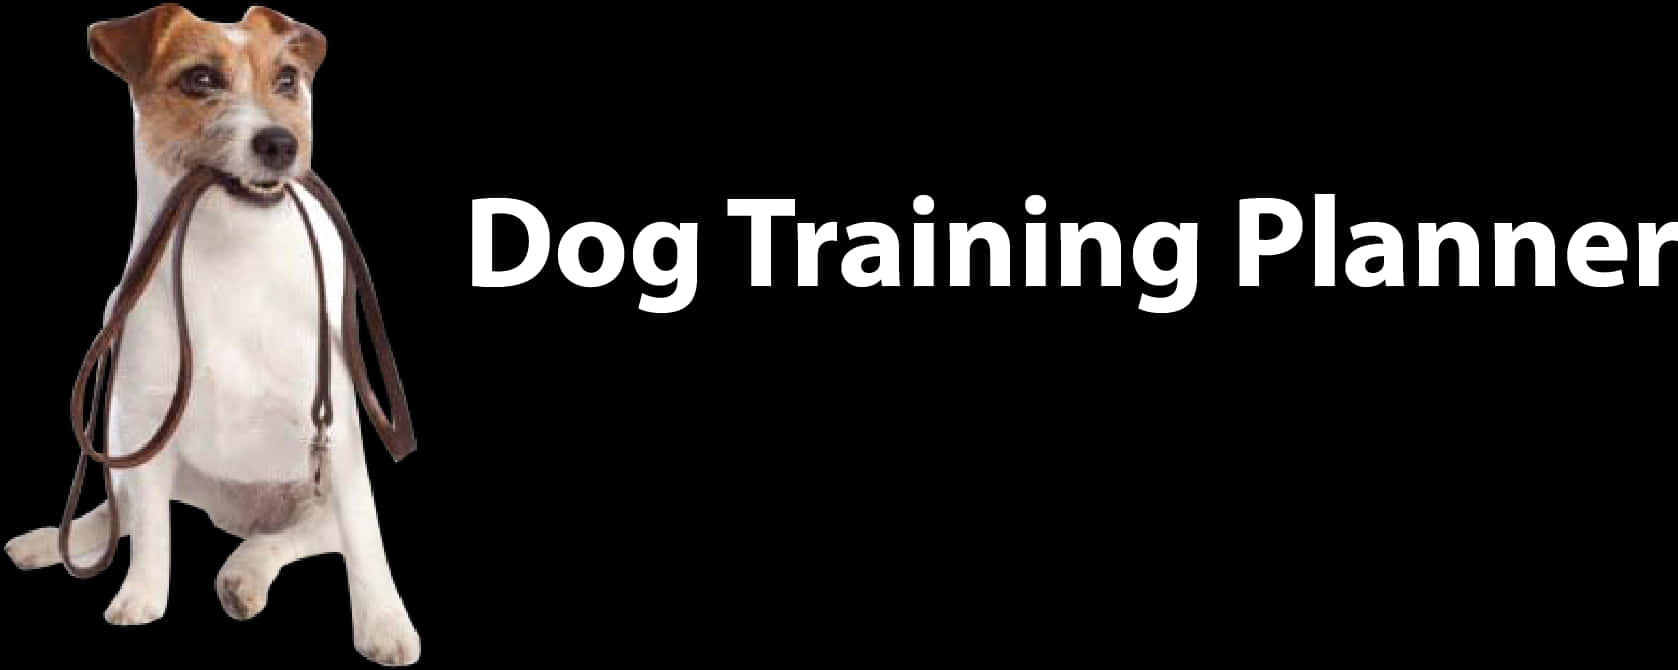 Readyfor Training Dogwith Leash PNG image